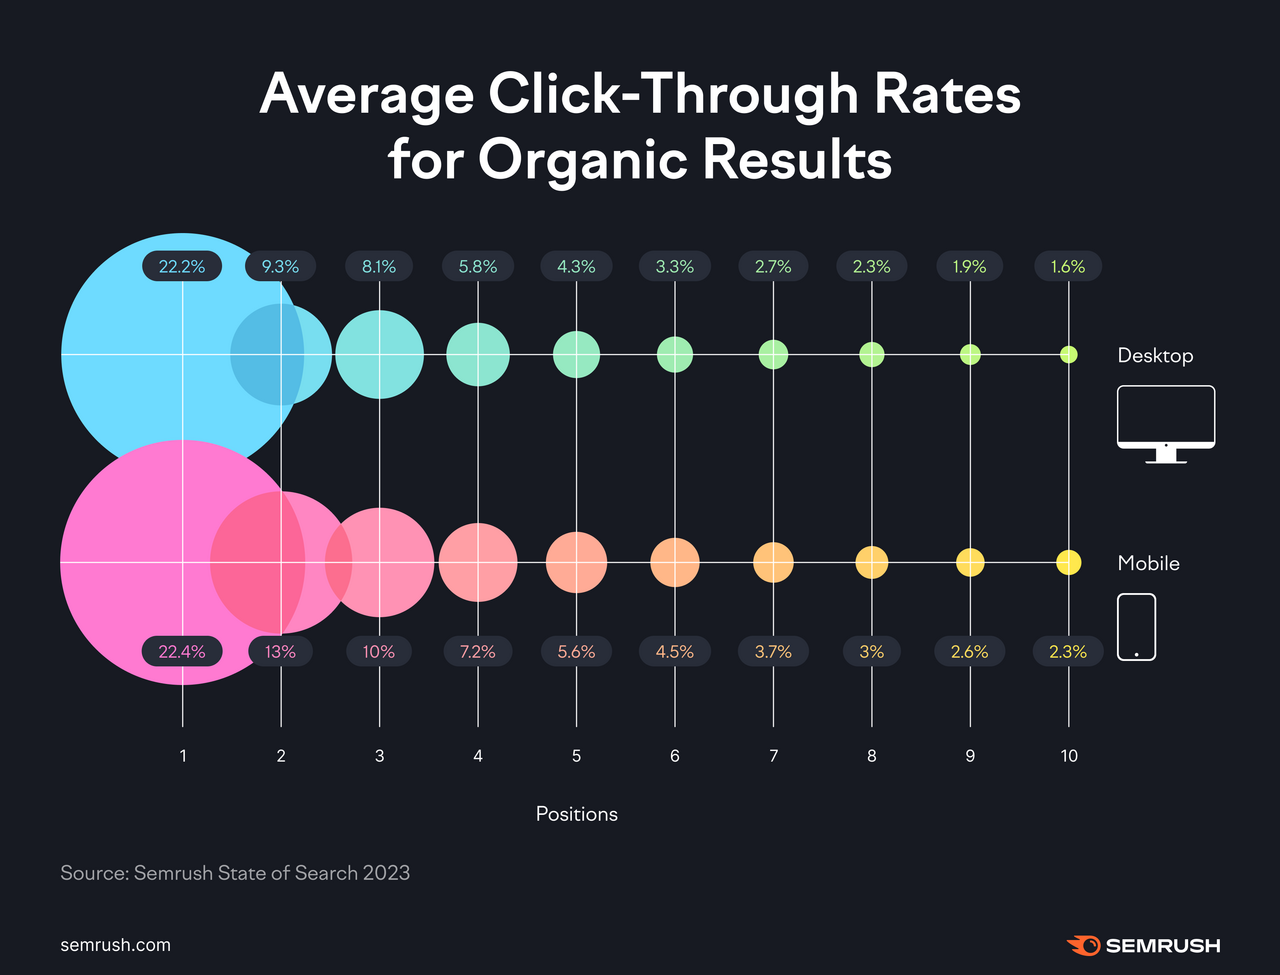 Average click through rates for organic results compared for desktop and mobile devices for top ten positions.